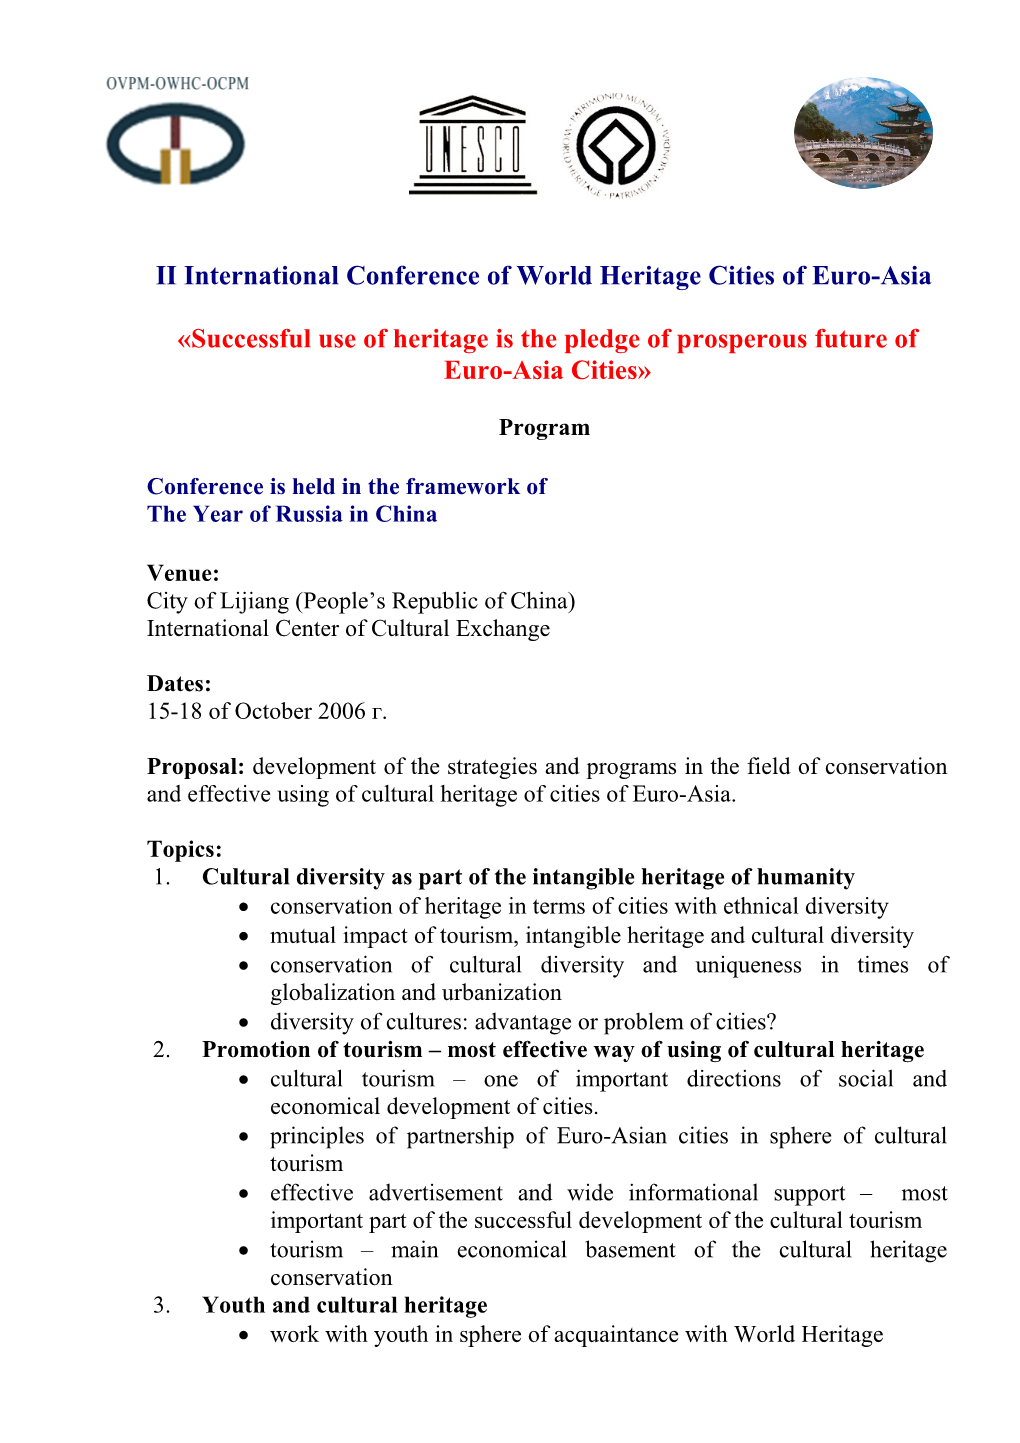 II International Conference of World Heritage Cities of Euro-Asia